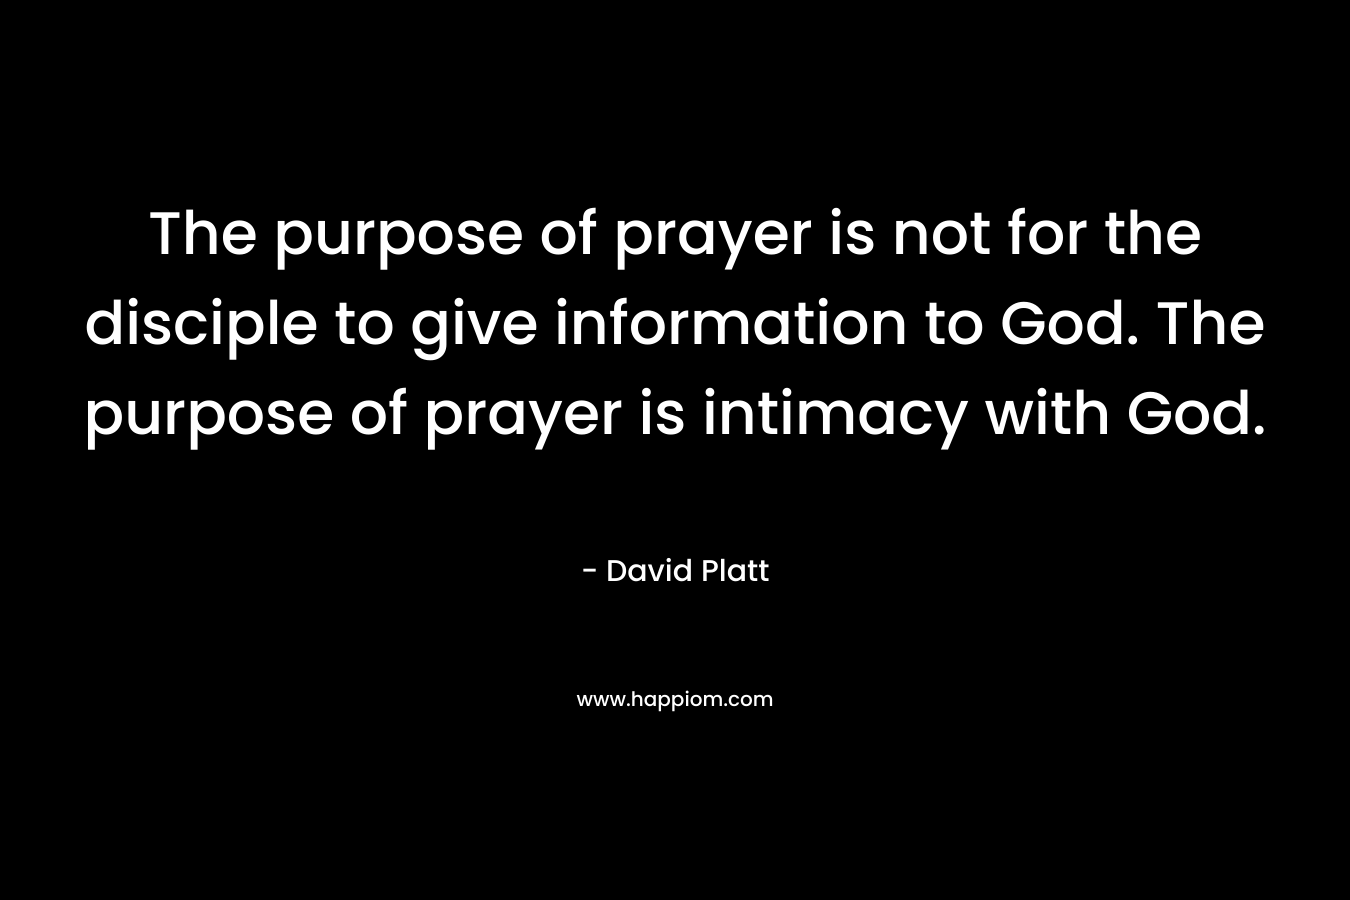 The purpose of prayer is not for the disciple to give information to God. The purpose of prayer is intimacy with God. – David Platt